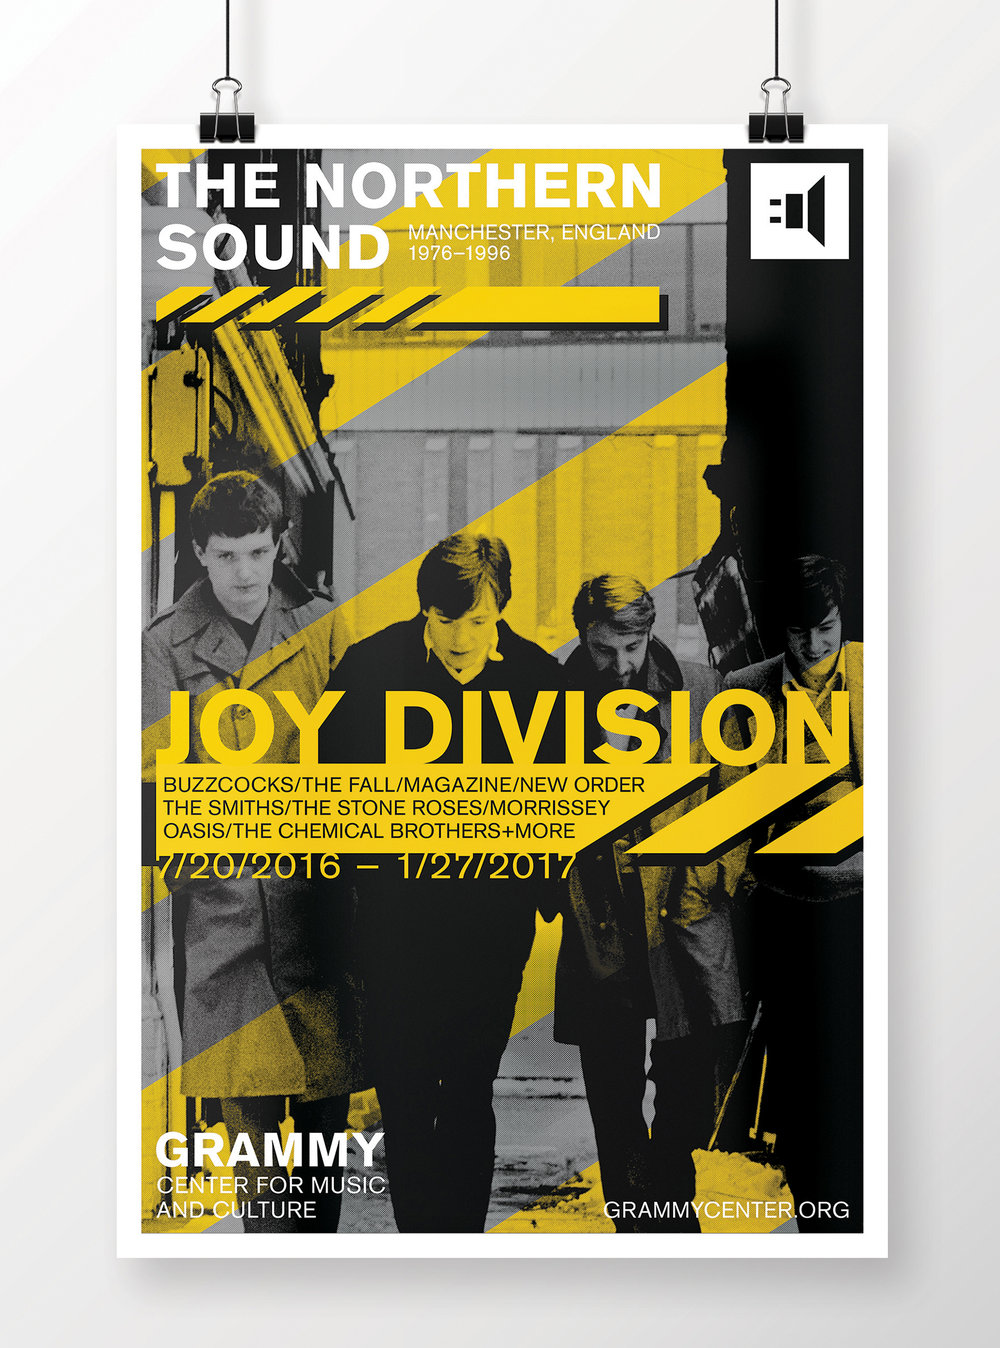  Joy Division are one of the must influential indie rock and post-punk bands of all time and helped cement Manchester's legacy as a musical mecca. 